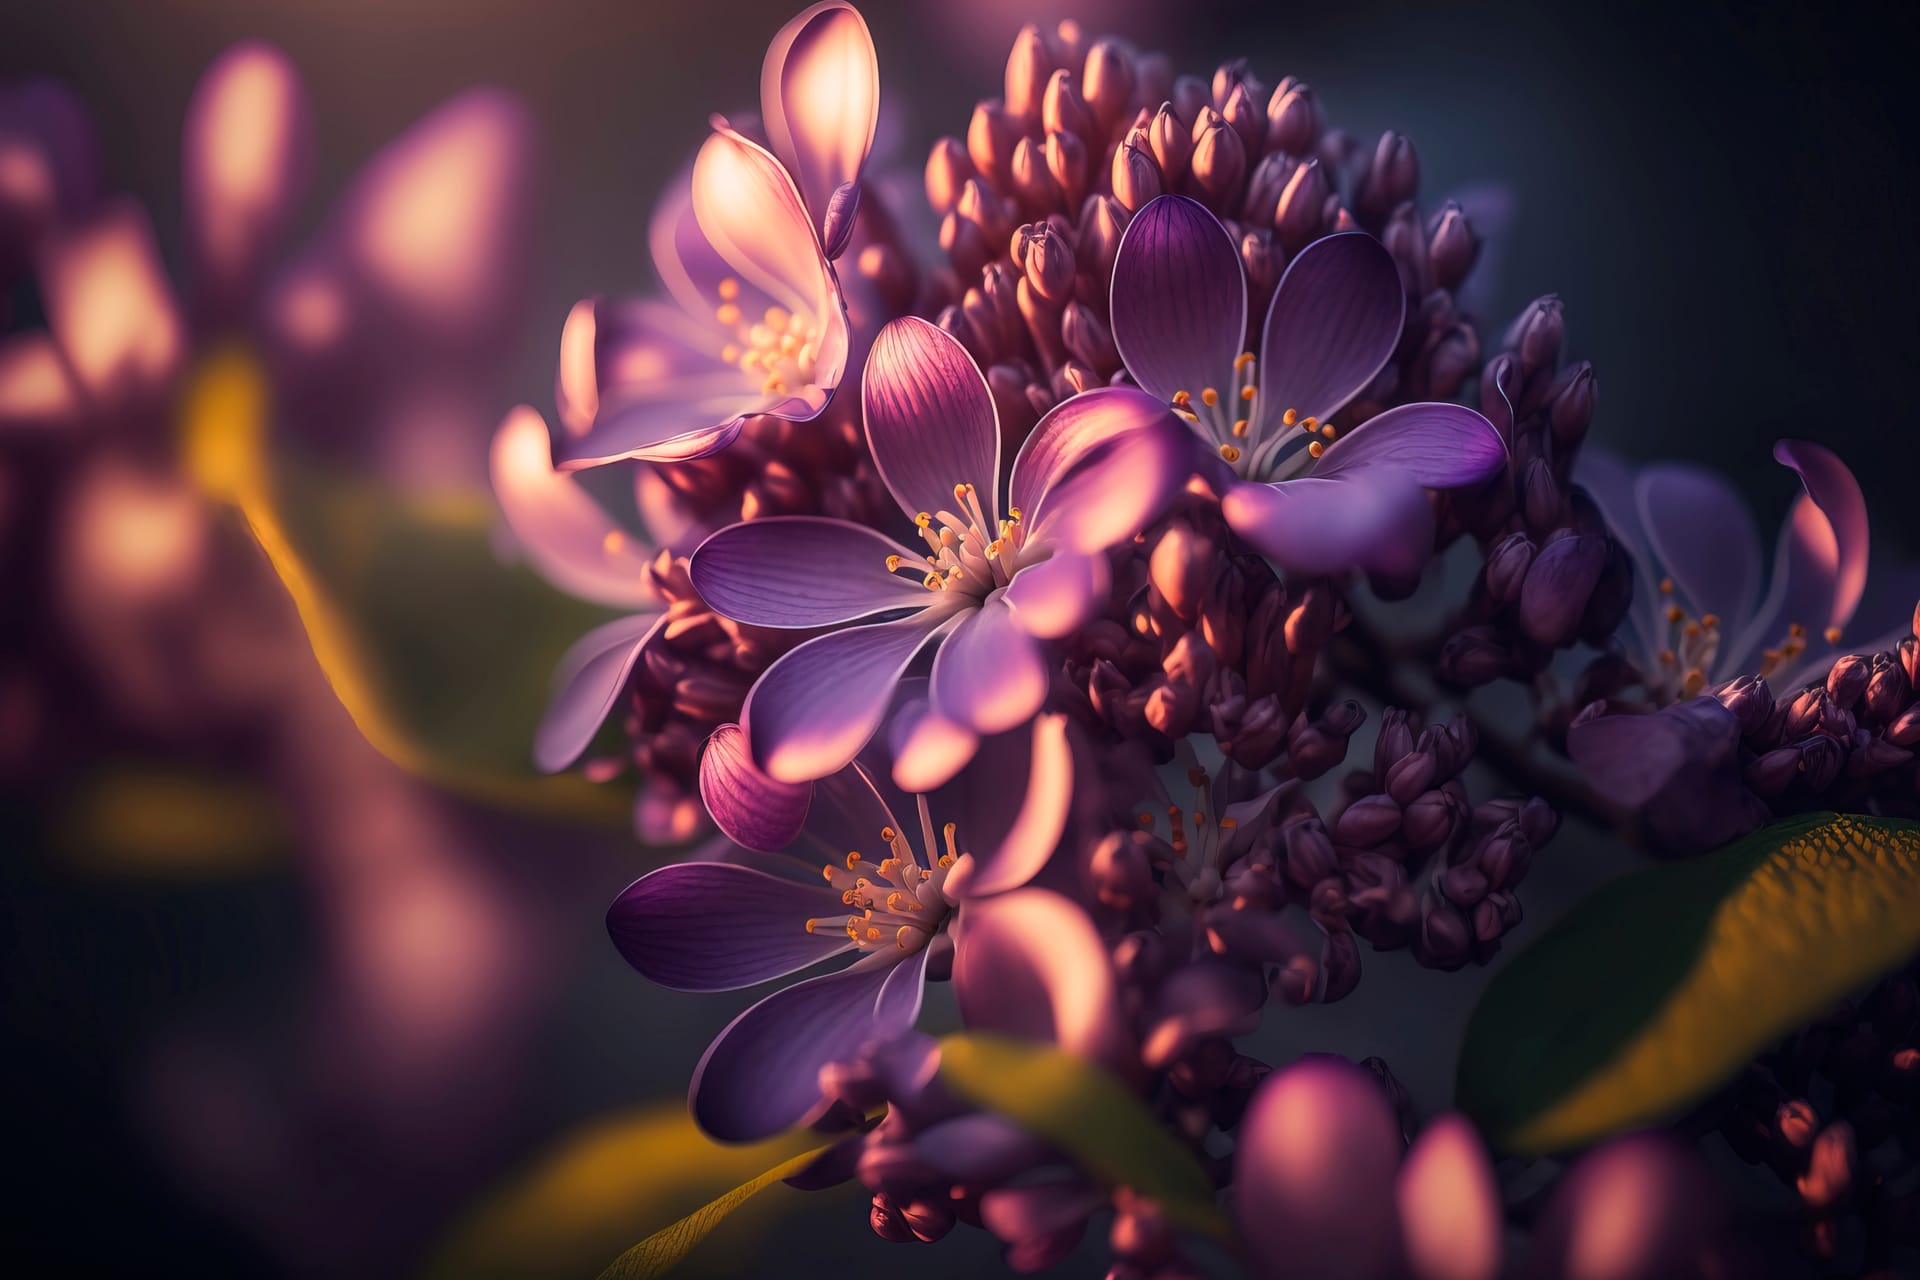 Pink profile picture spring lilac violet flowers abstract soft floral background